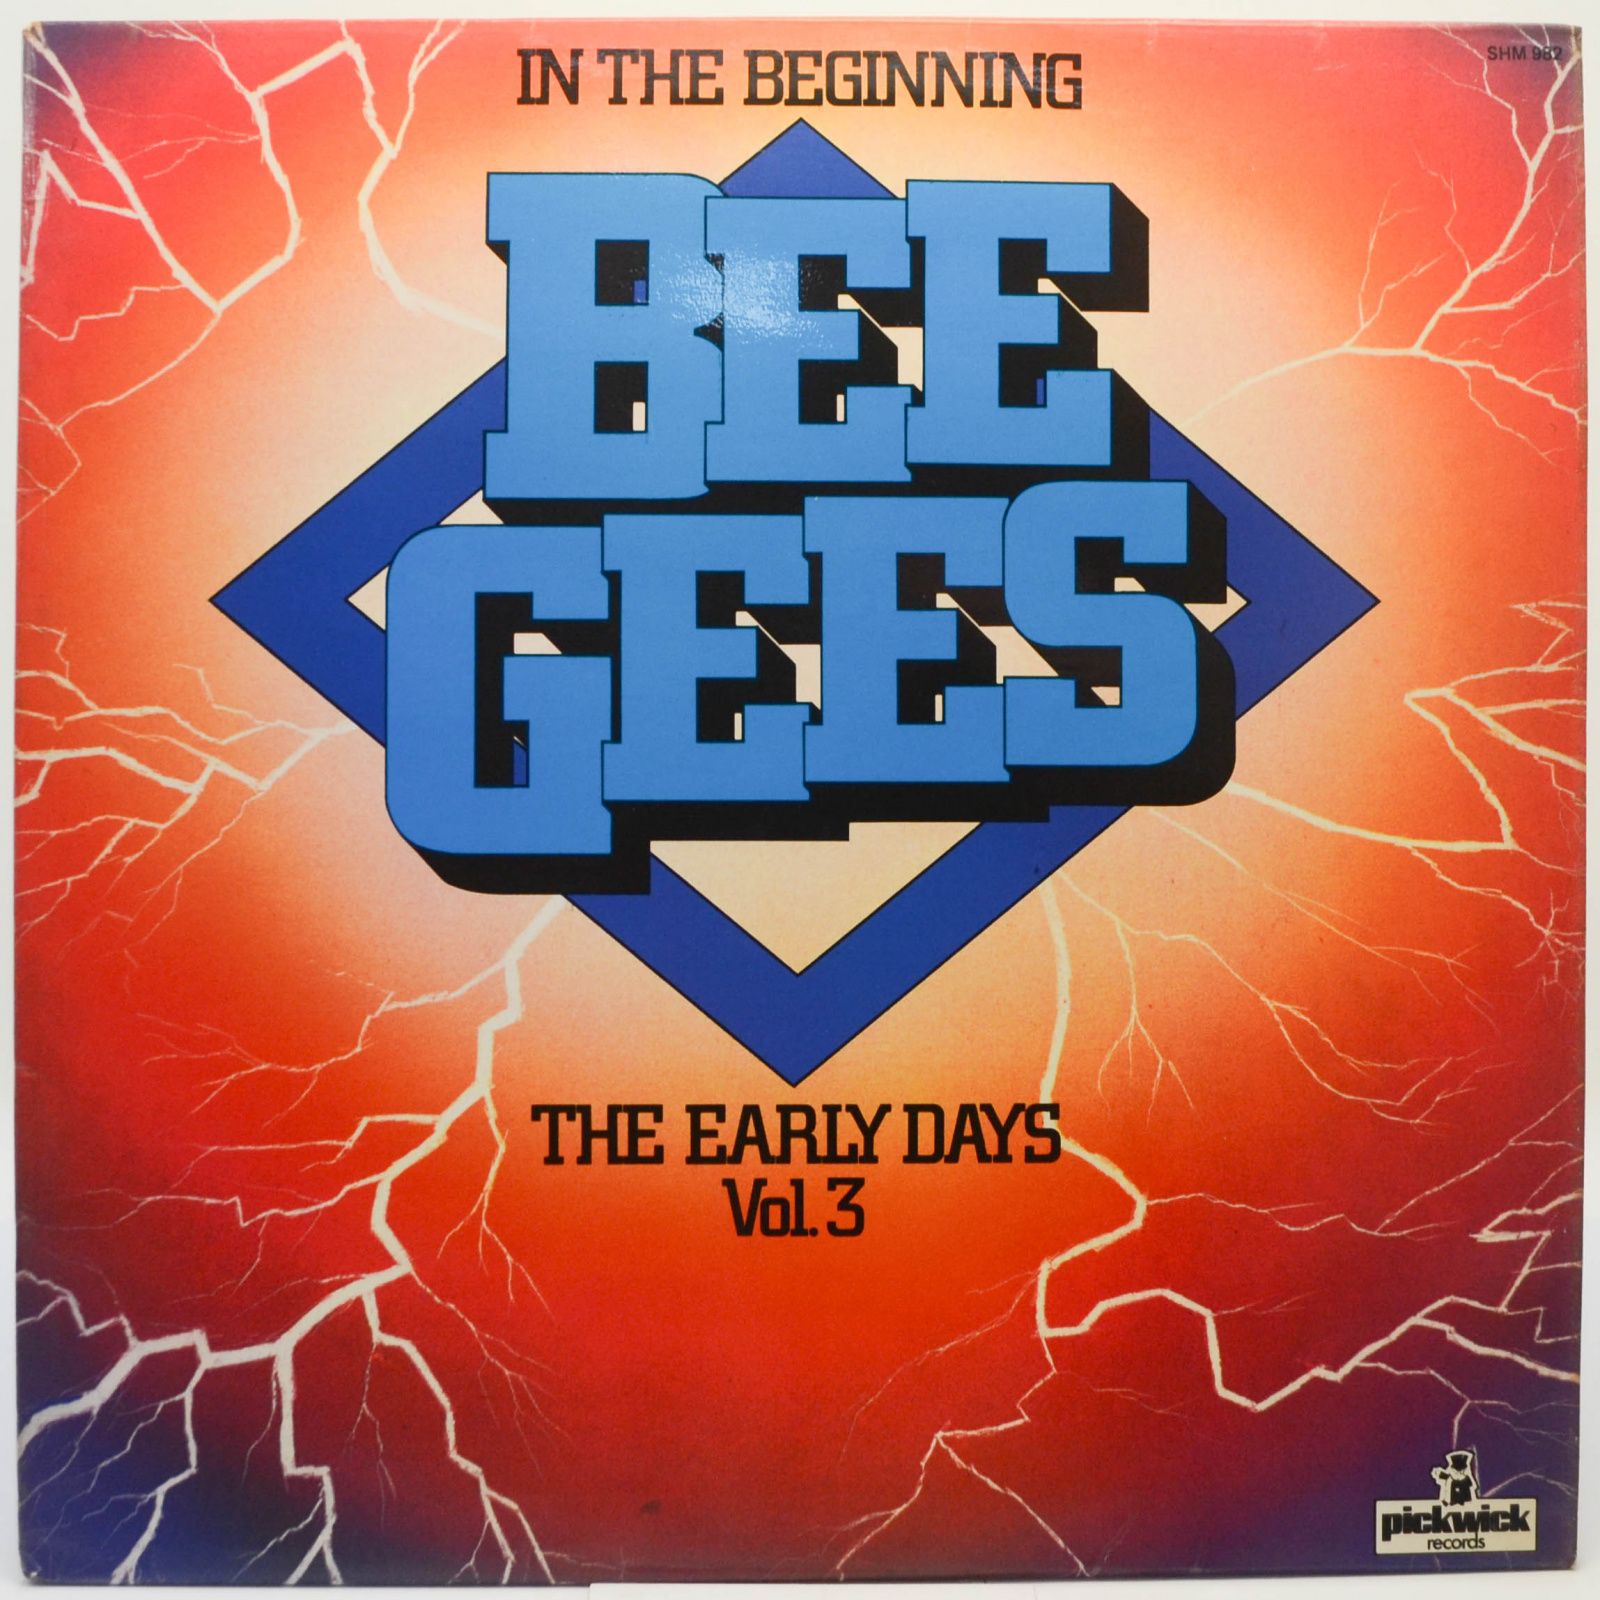 Bee Gees — In The Beginning - The Early Days Vol. 3 (UK), 1978